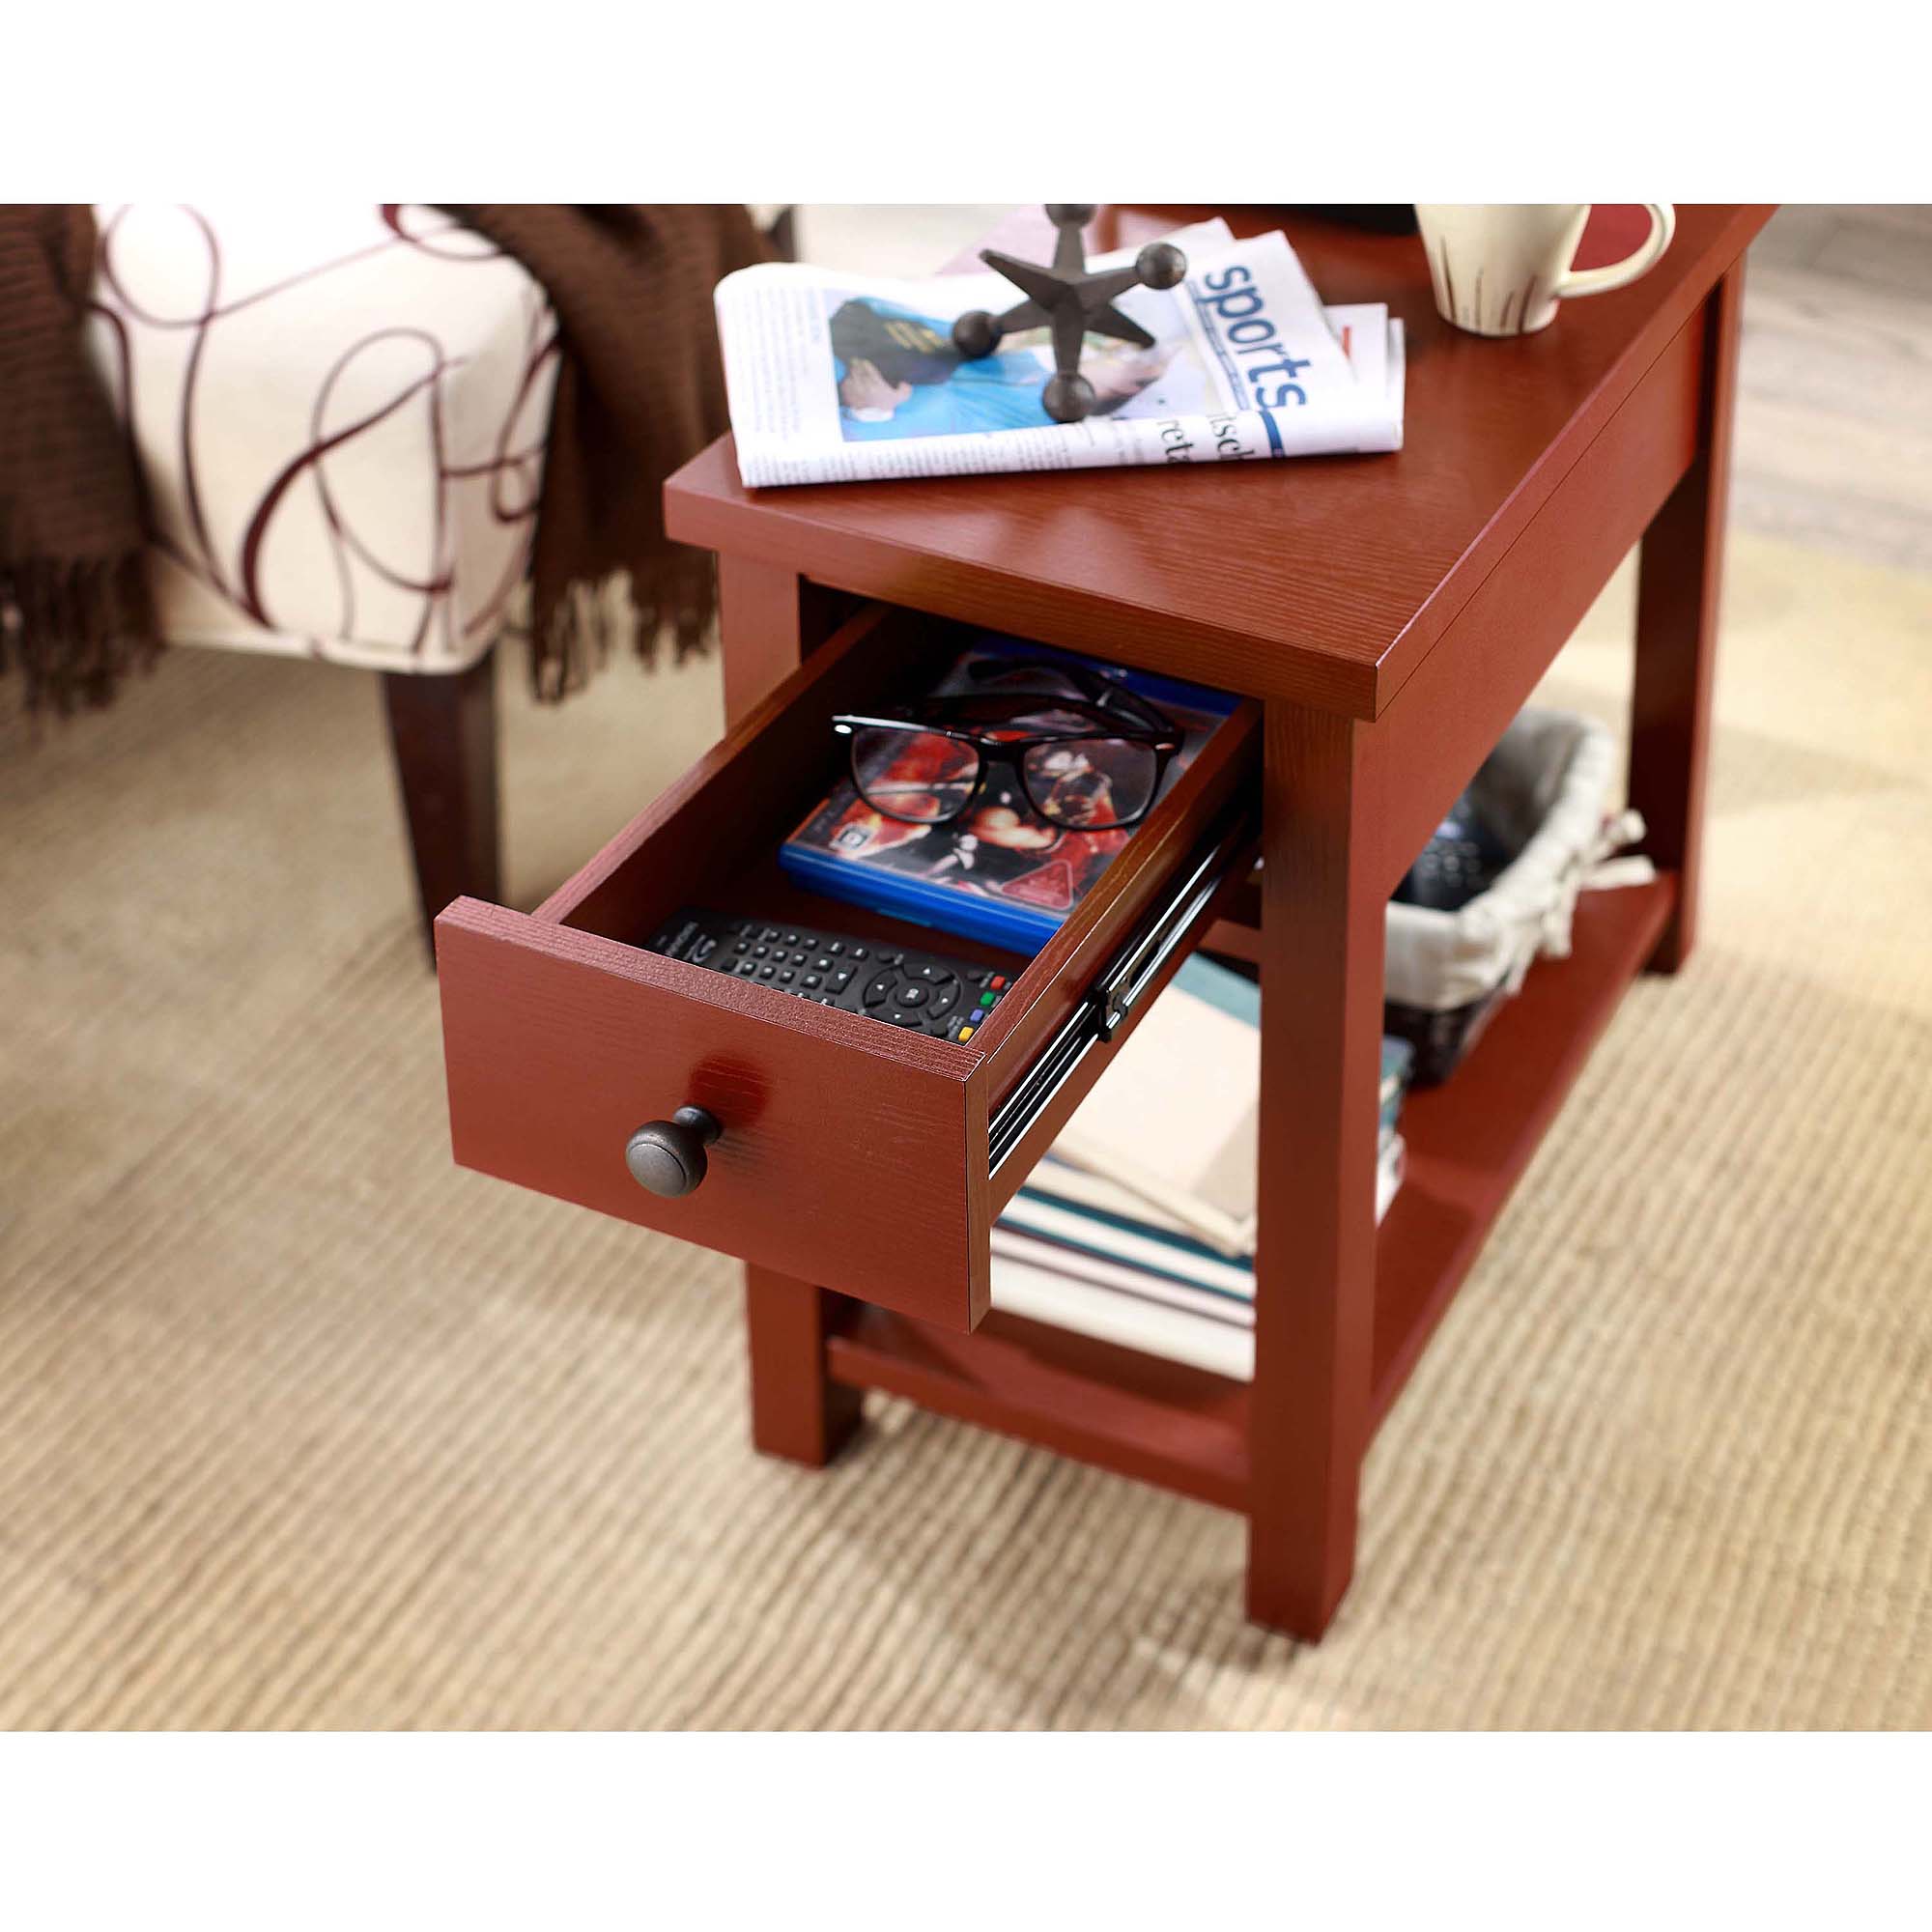 Better Homes & Gardens Oxford Square End Table with Drawer, Solid Wood, Multiple Finishes - image 3 of 5